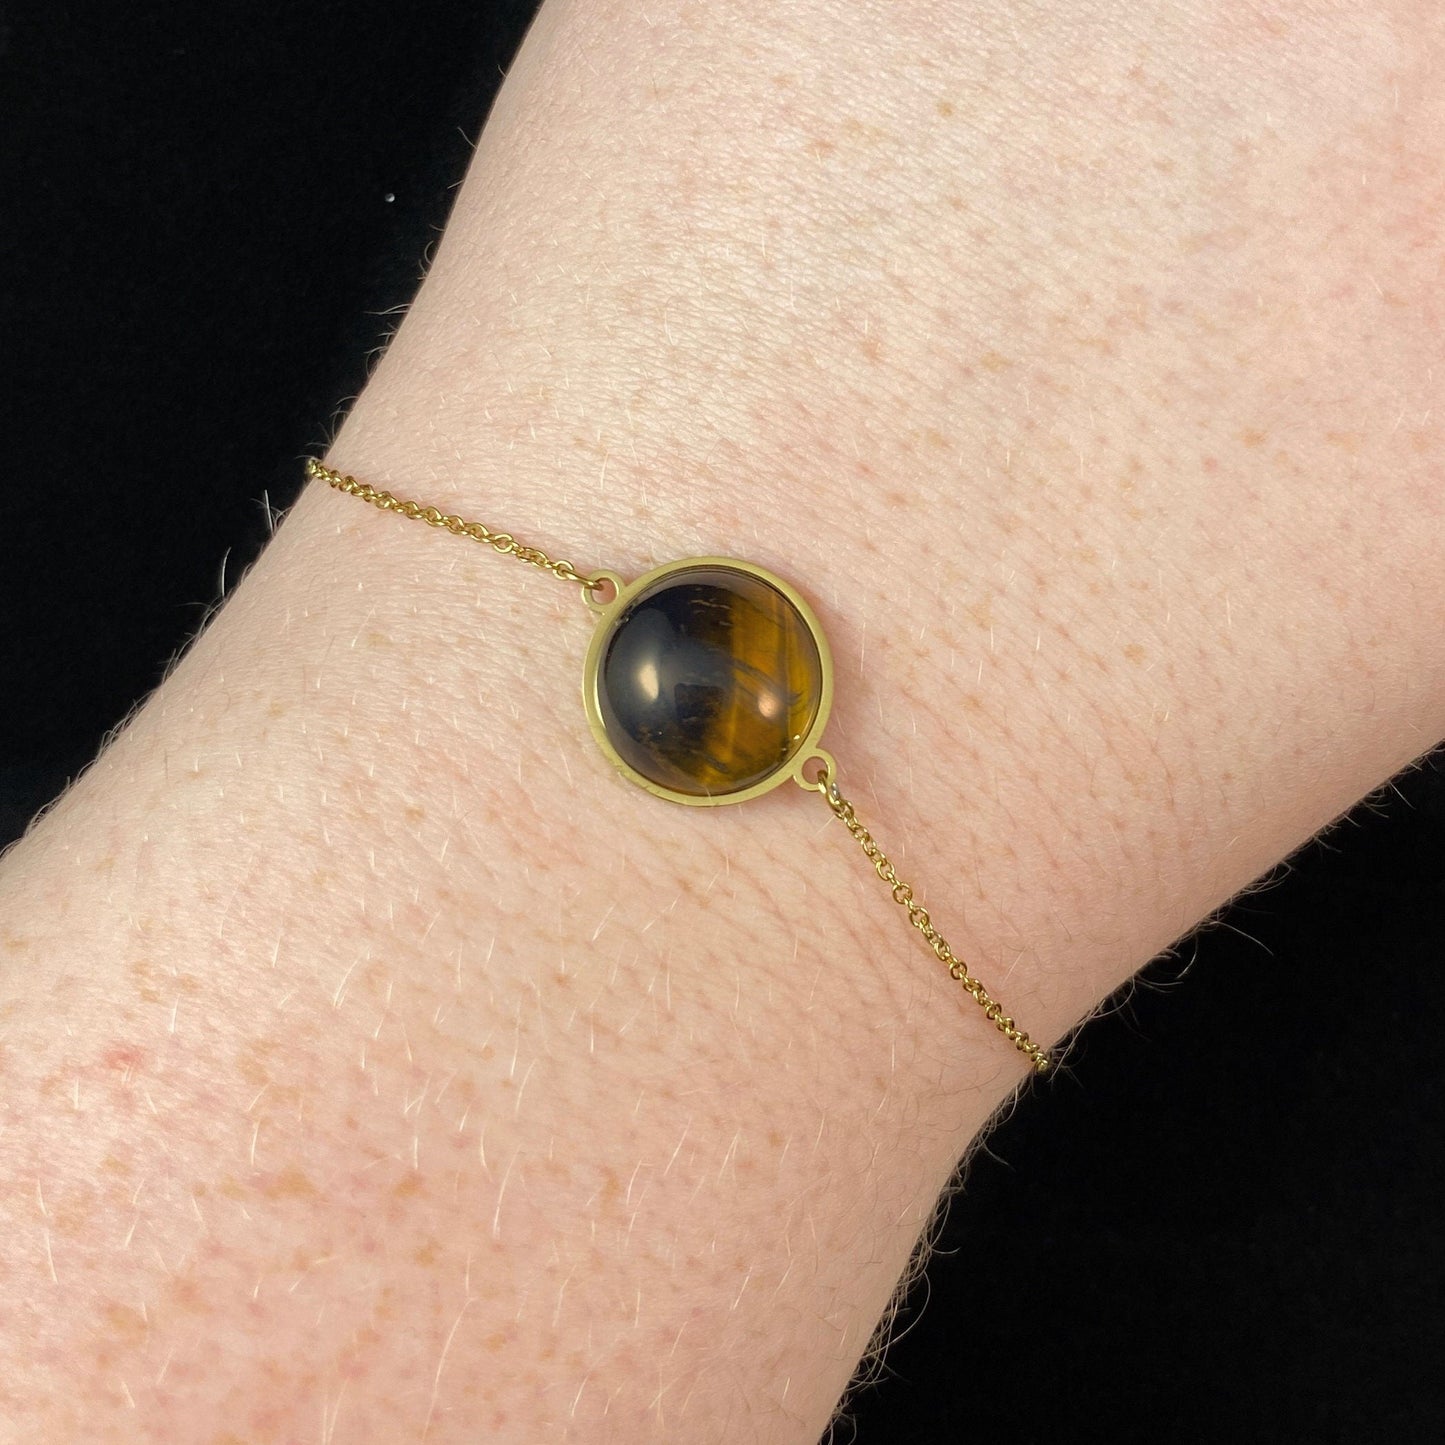 Brown & Orange Natural Stone Bracelet with Tiny Gold Chain Band and Circular Stone